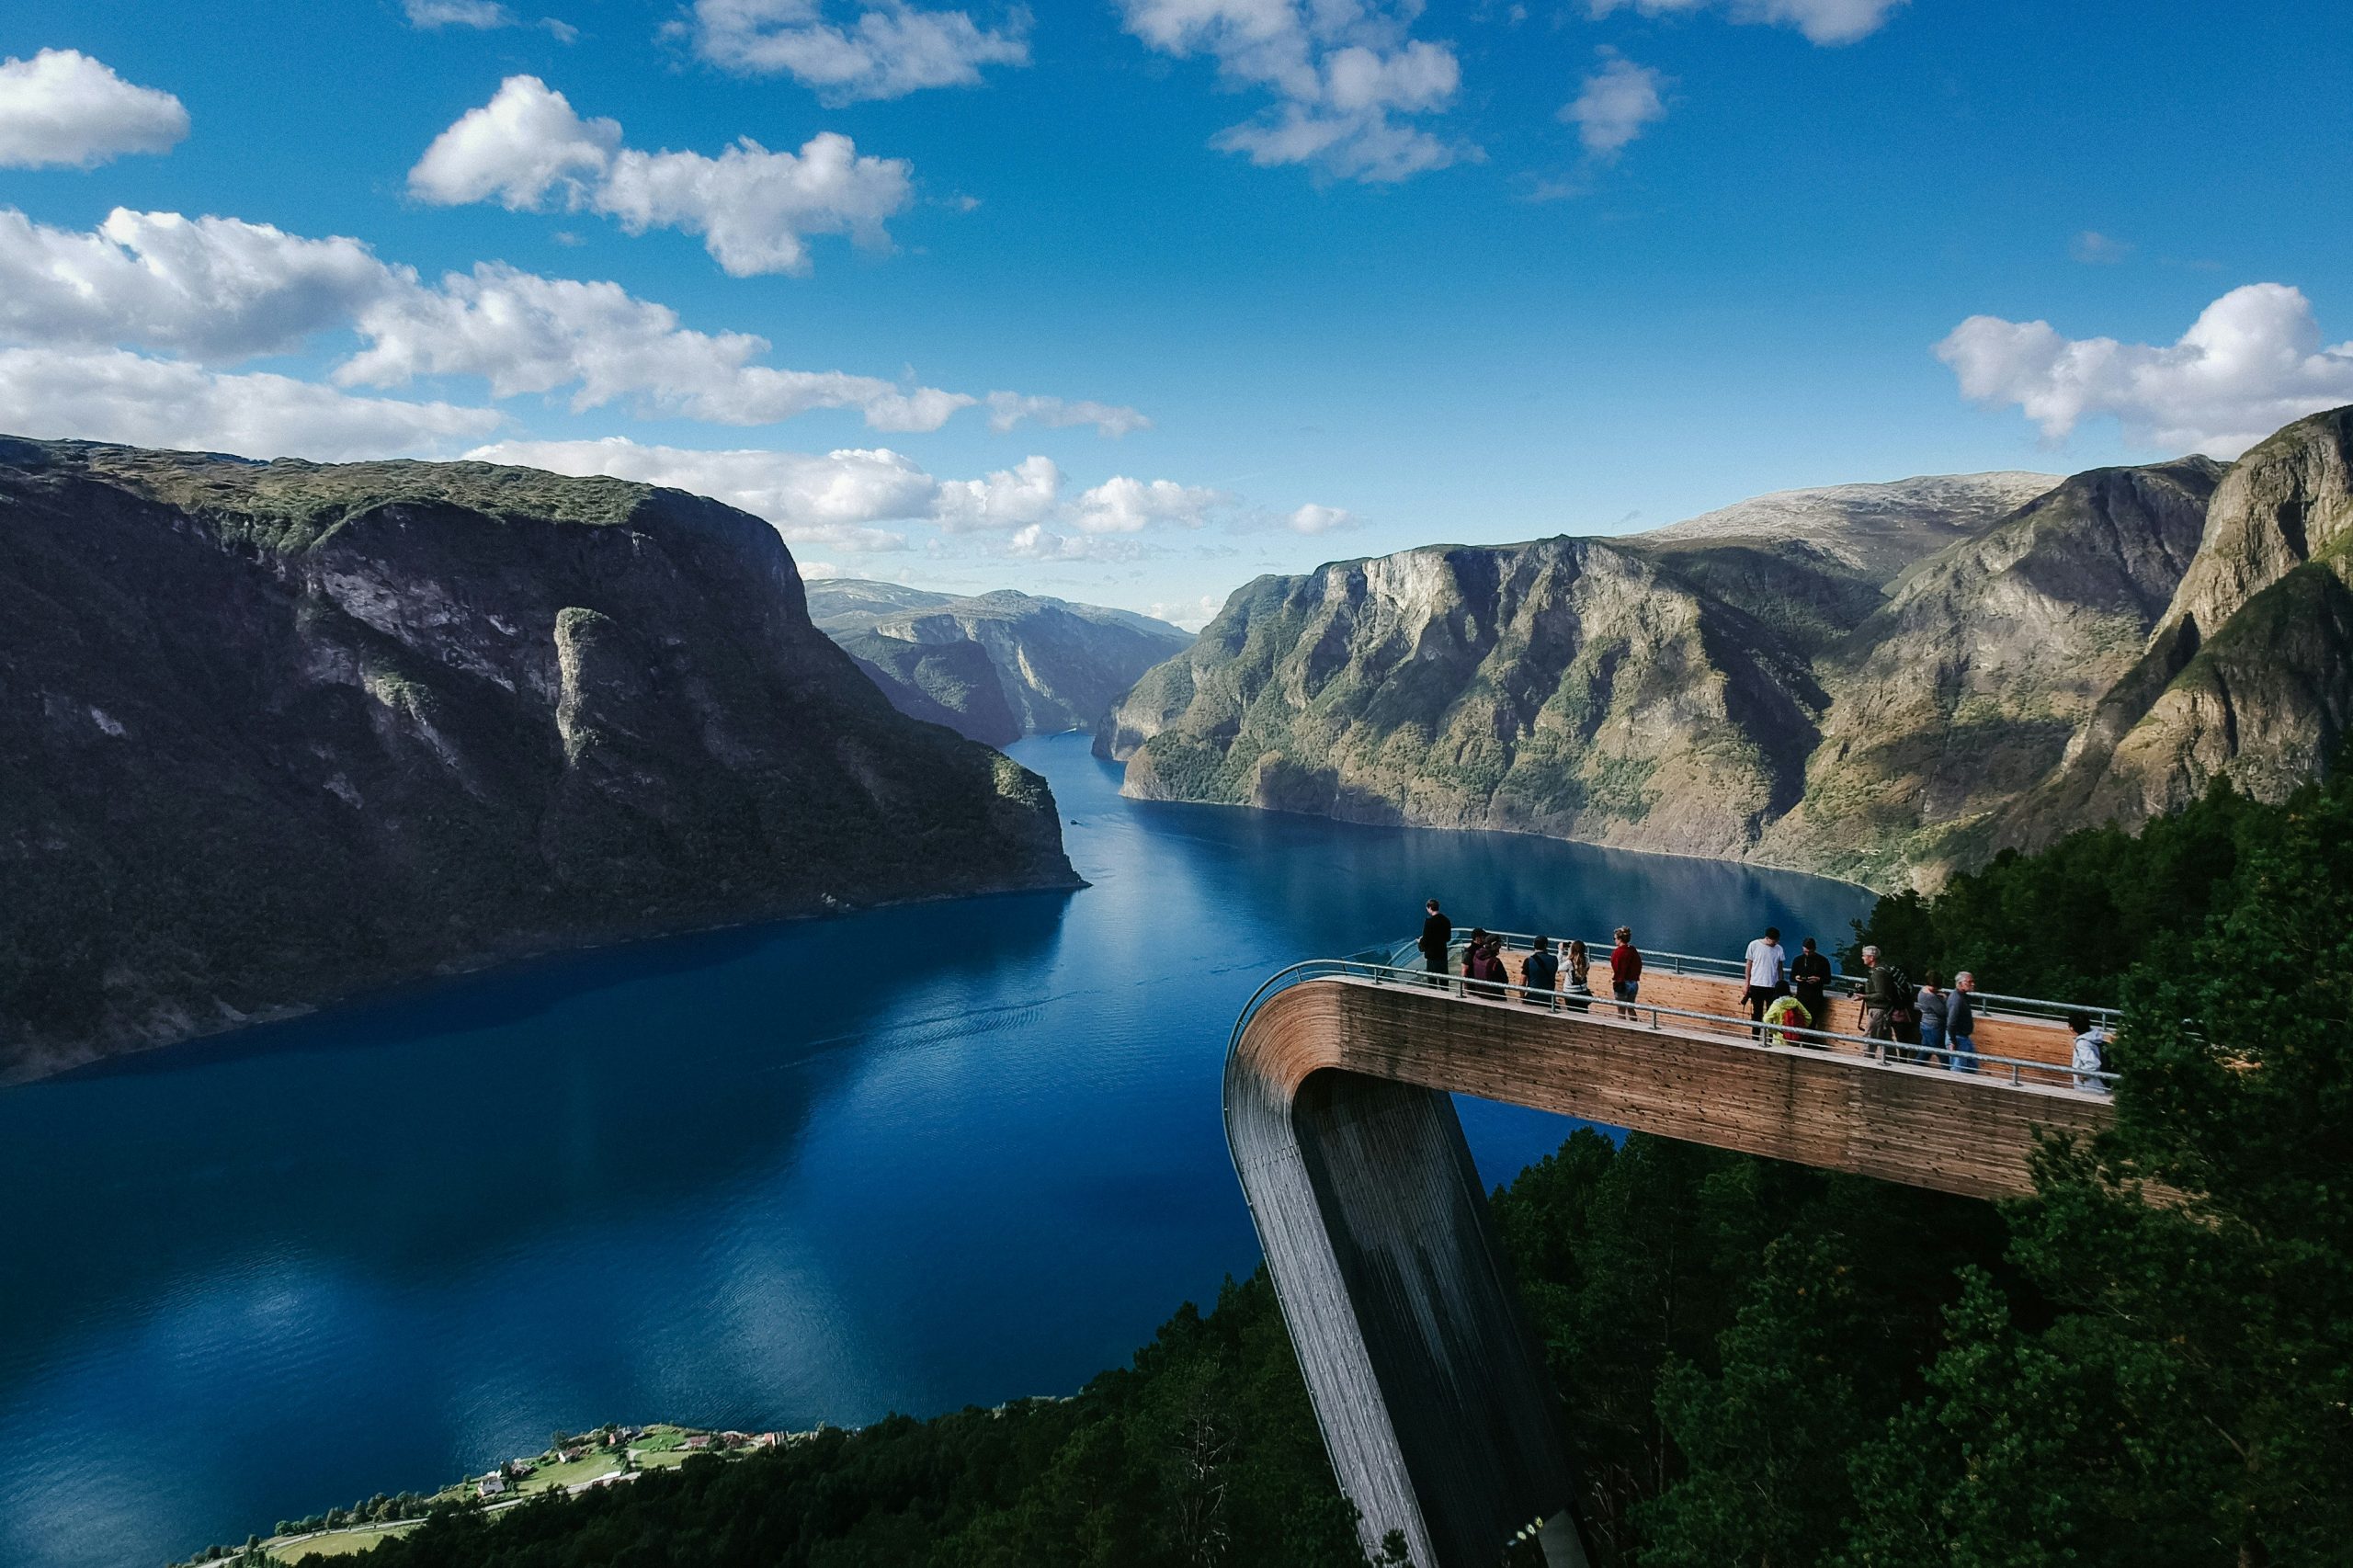 discover the breathtaking beauty of fjords in norway and get lost in stunning natural landscapes.